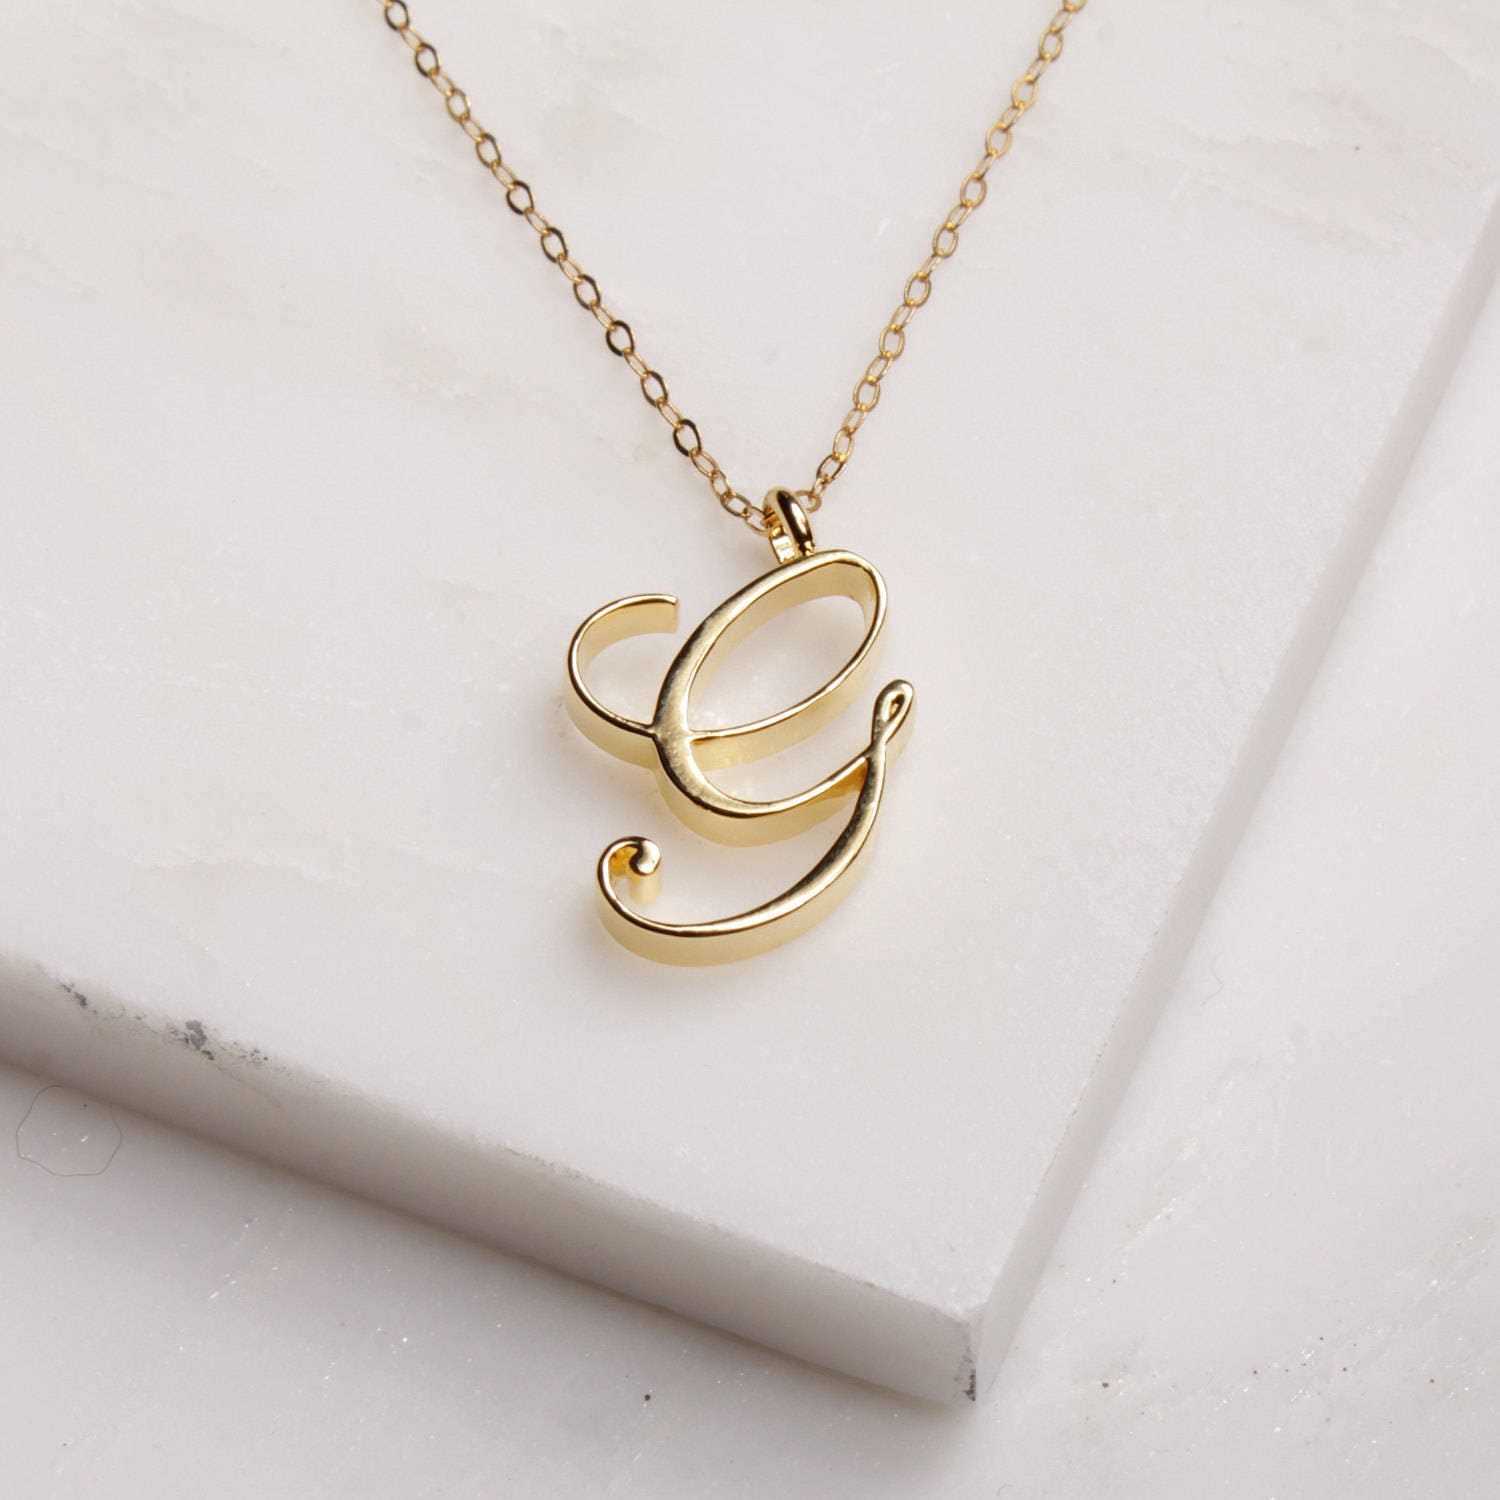 Initial Necklace | G Initial Necklace | G Initial Sideways Necklace In Gold  Overlay, 18 Inches | SuperJeweler